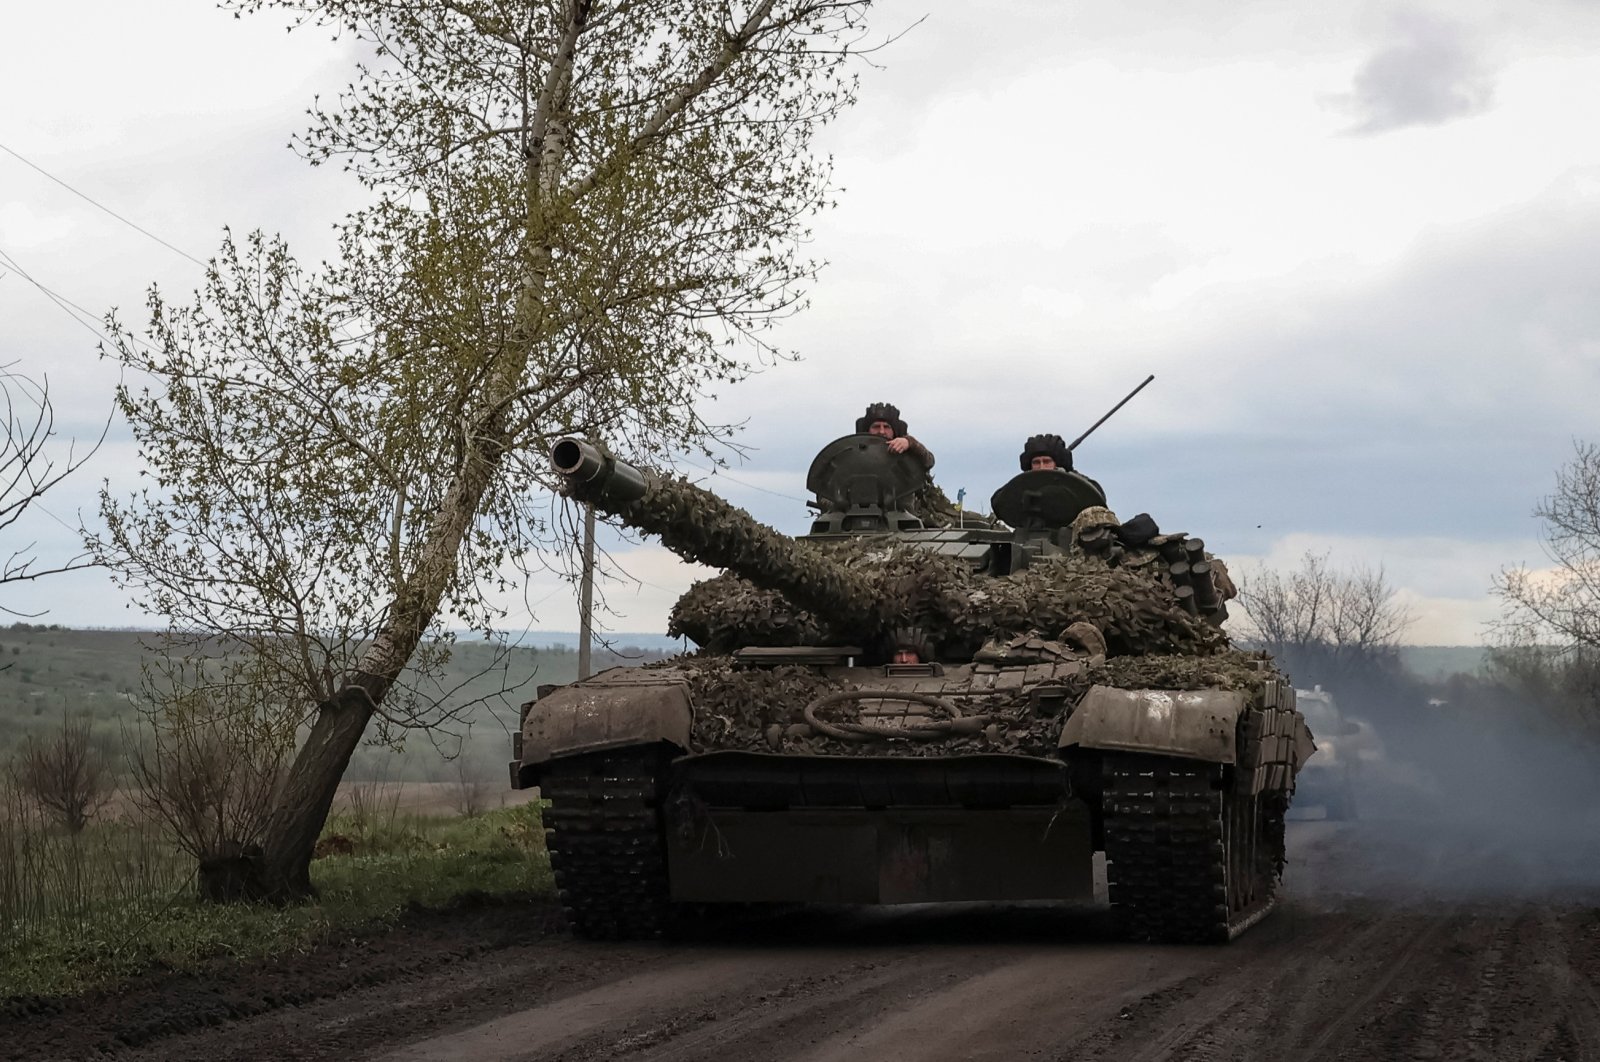 Ukrainian servicemen ride in a tank along a road in the town of Chasiv Yar, Donetsk region, Ukraine, April 22, 2023. (Reuters Photo)